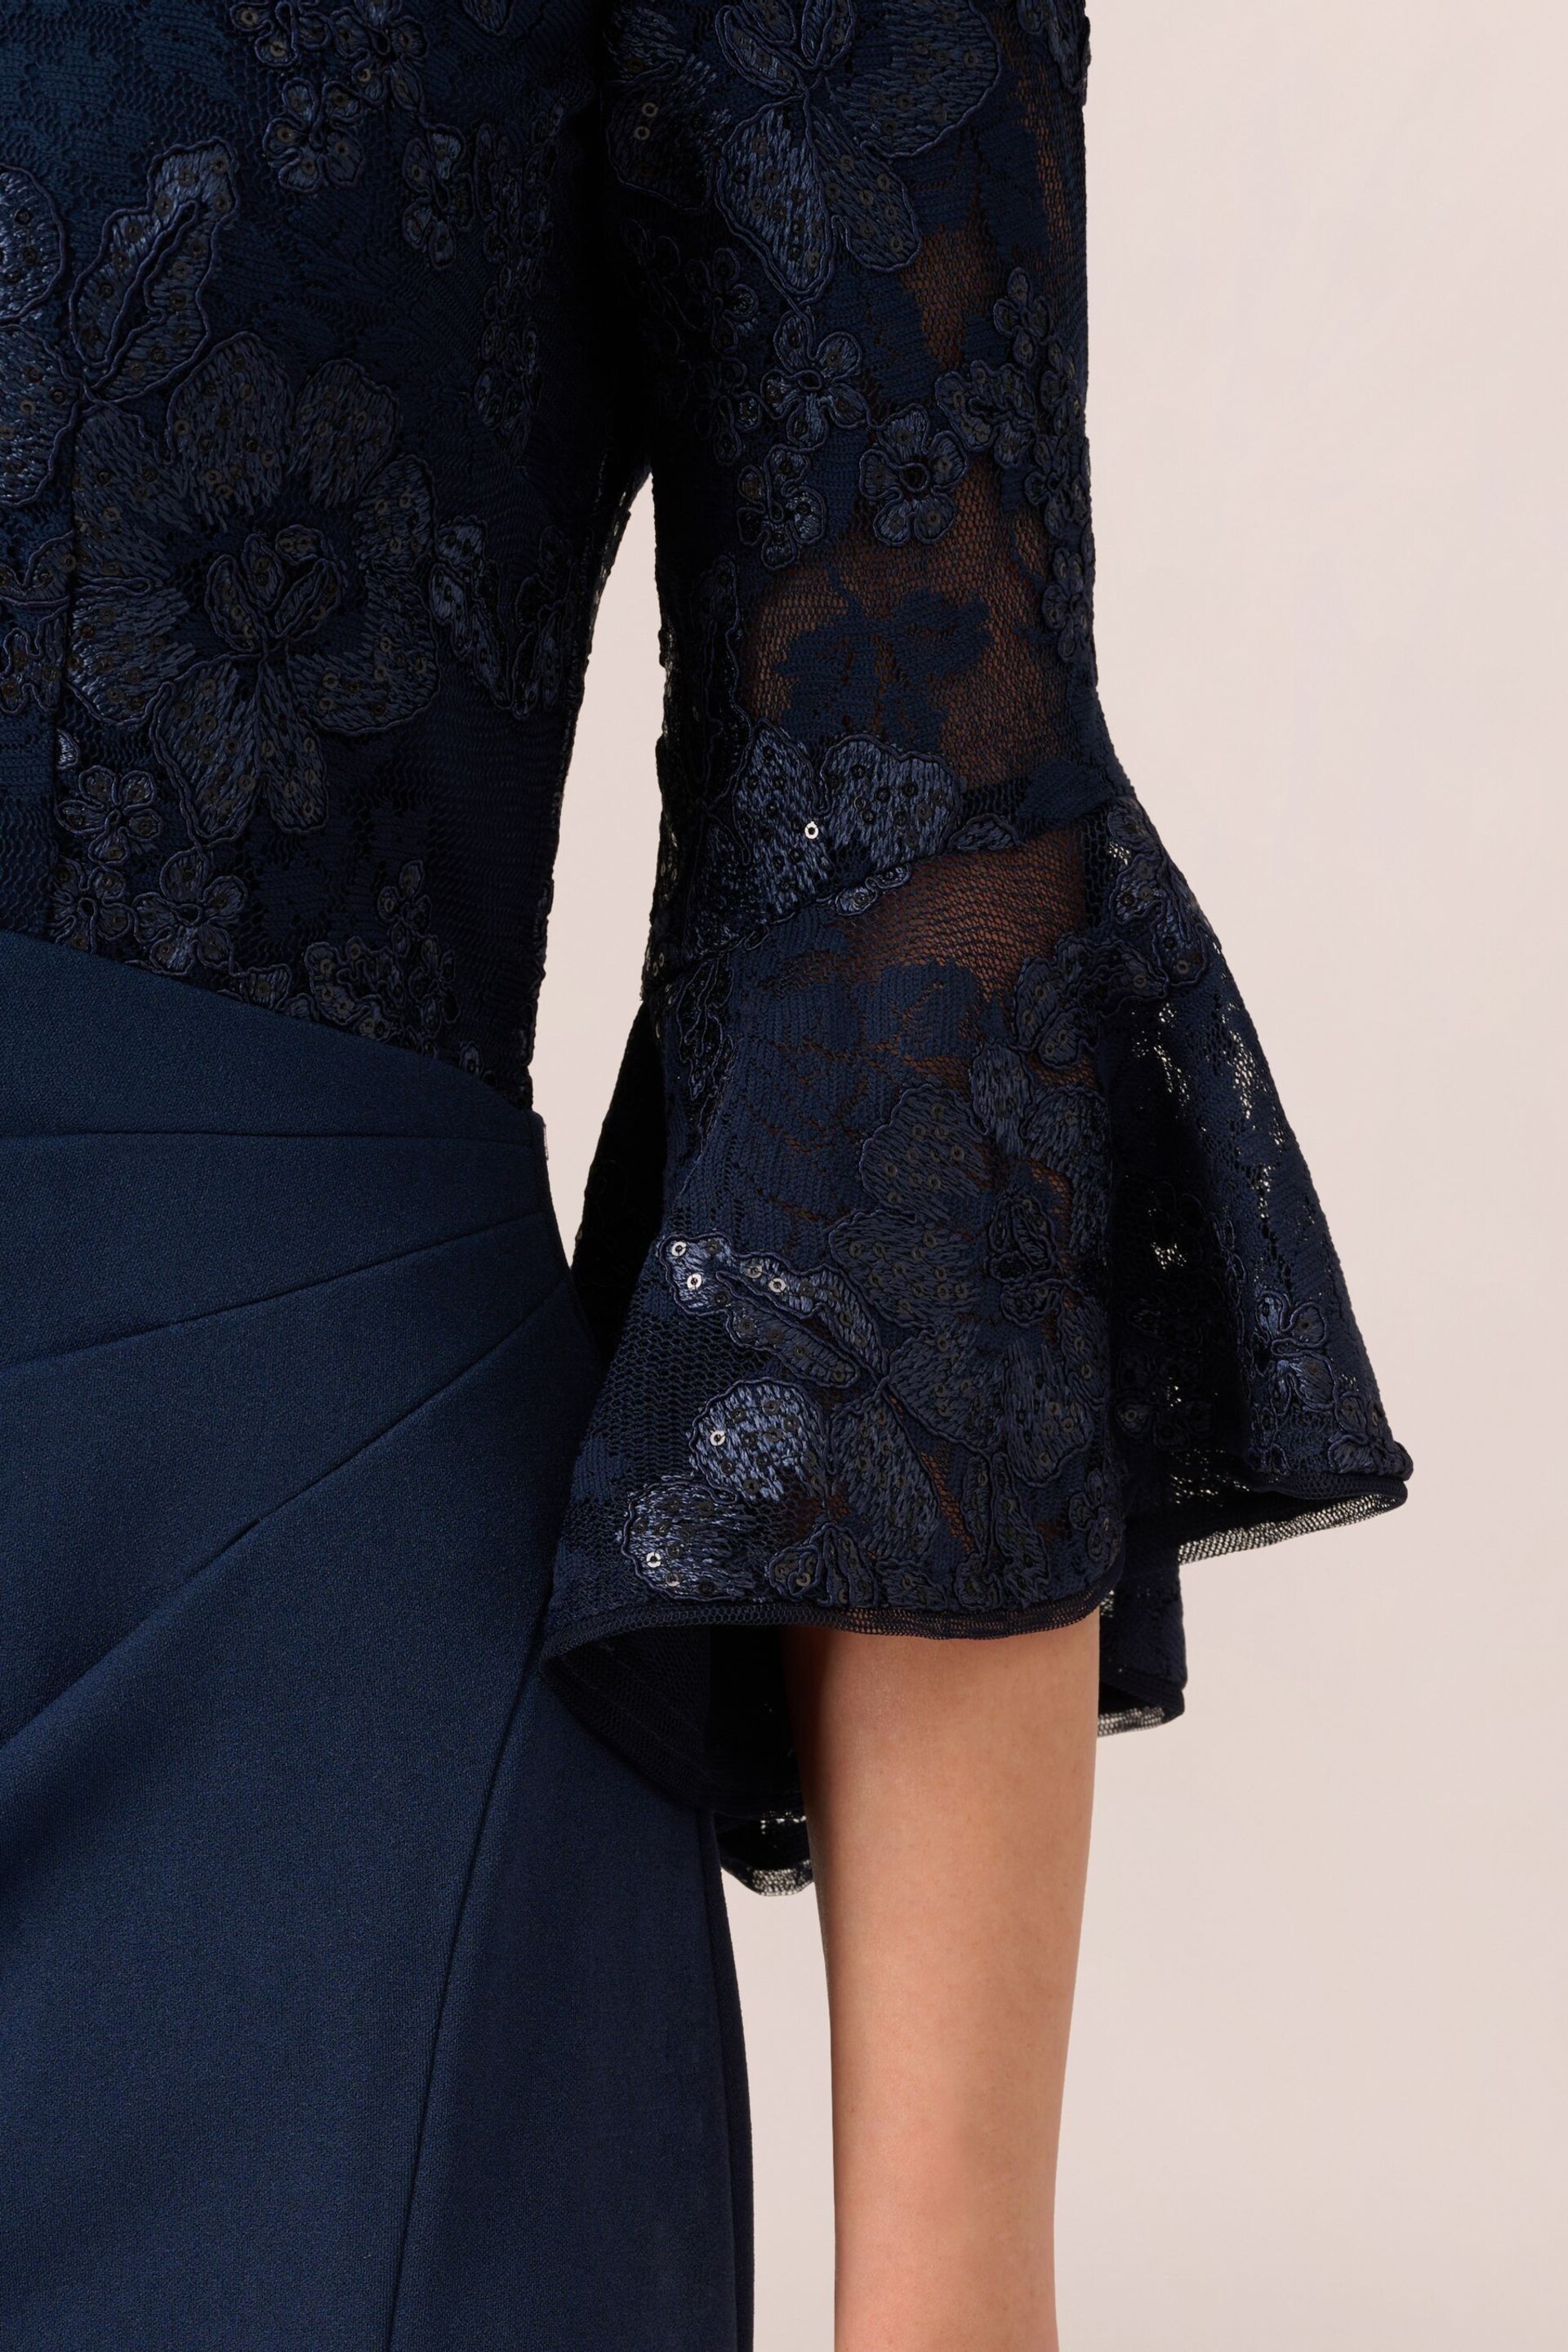 Adrianna Papell Blue Floral Lace Combo Dress - Image 6 of 7